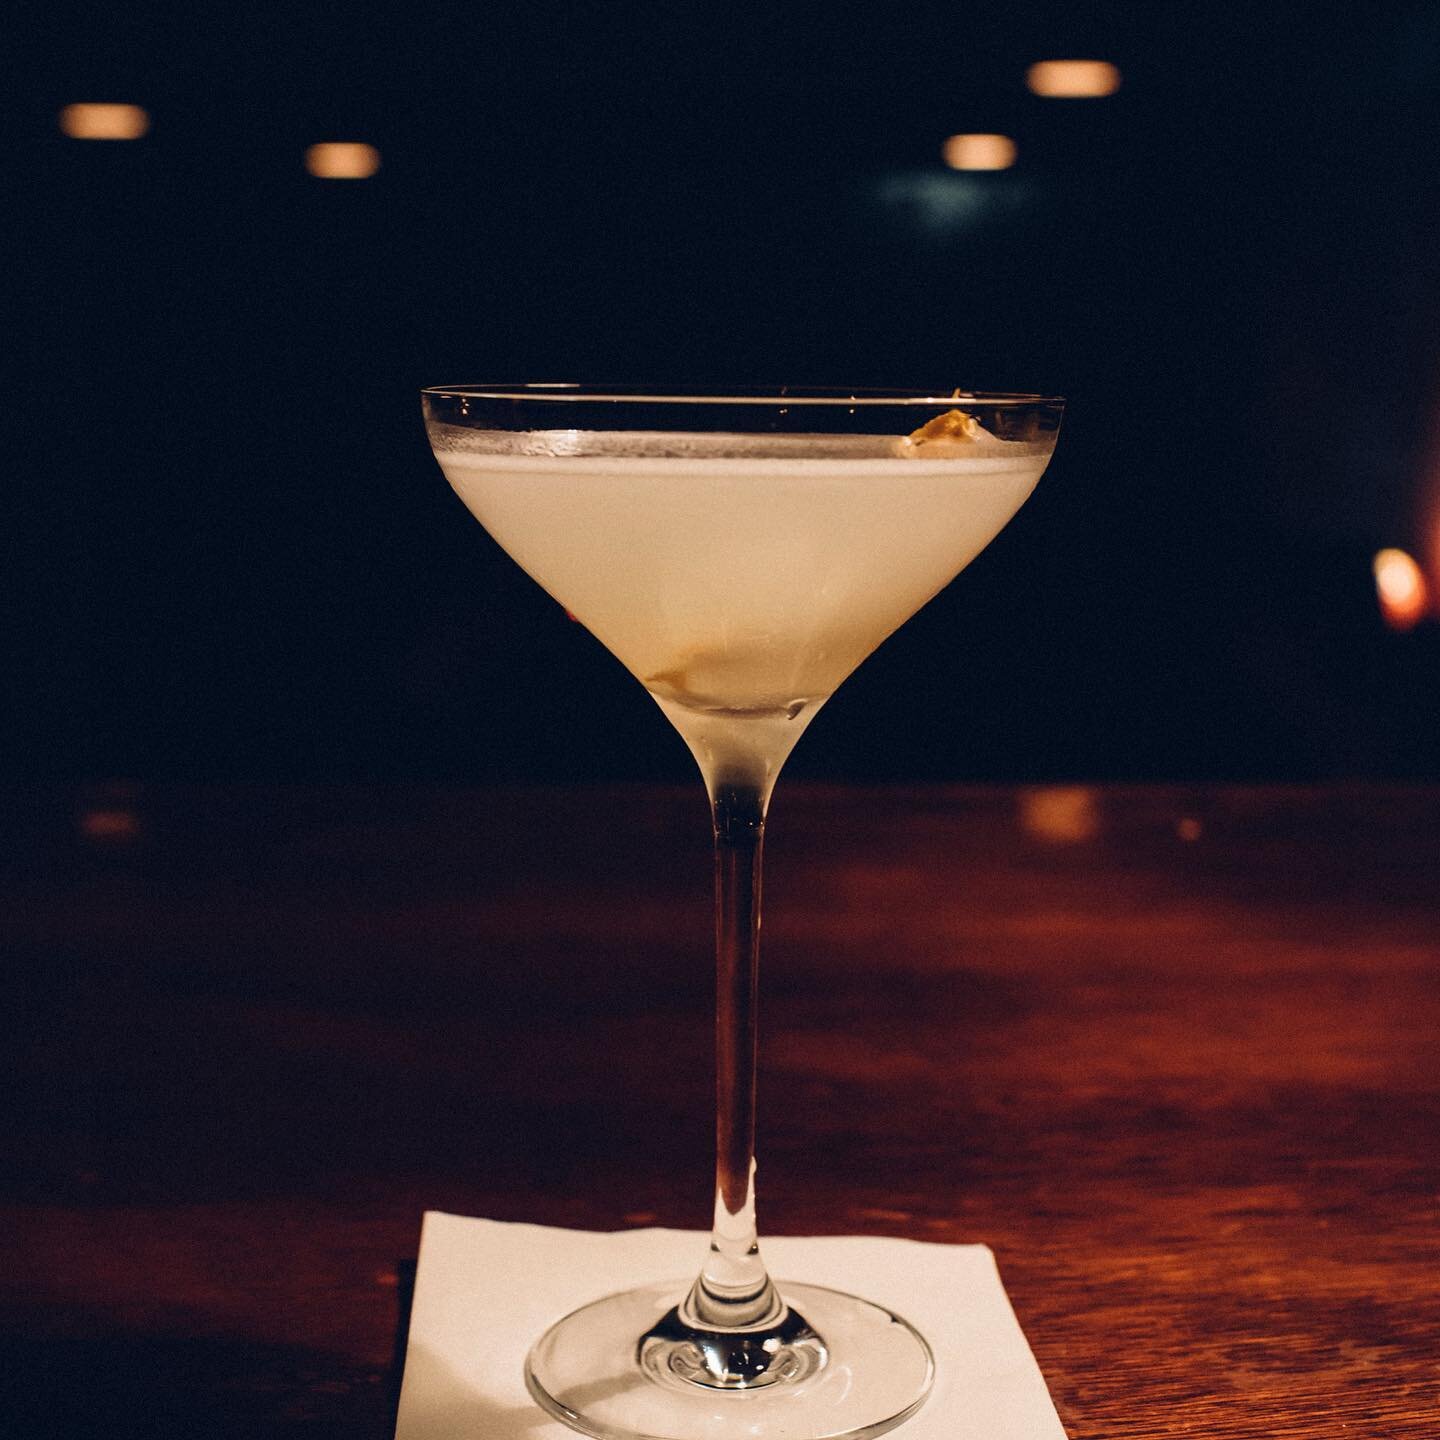 Every wednesday is $15 Daiquiri's at BarNone

Just have a classic, or mix it up!

Discover something new at BarNone.

#discovernew #discoversomethingnew #cocktailbible #barnonebible #bible #barnone #cocktails #cocktail #craftcocktail #melbournecockta